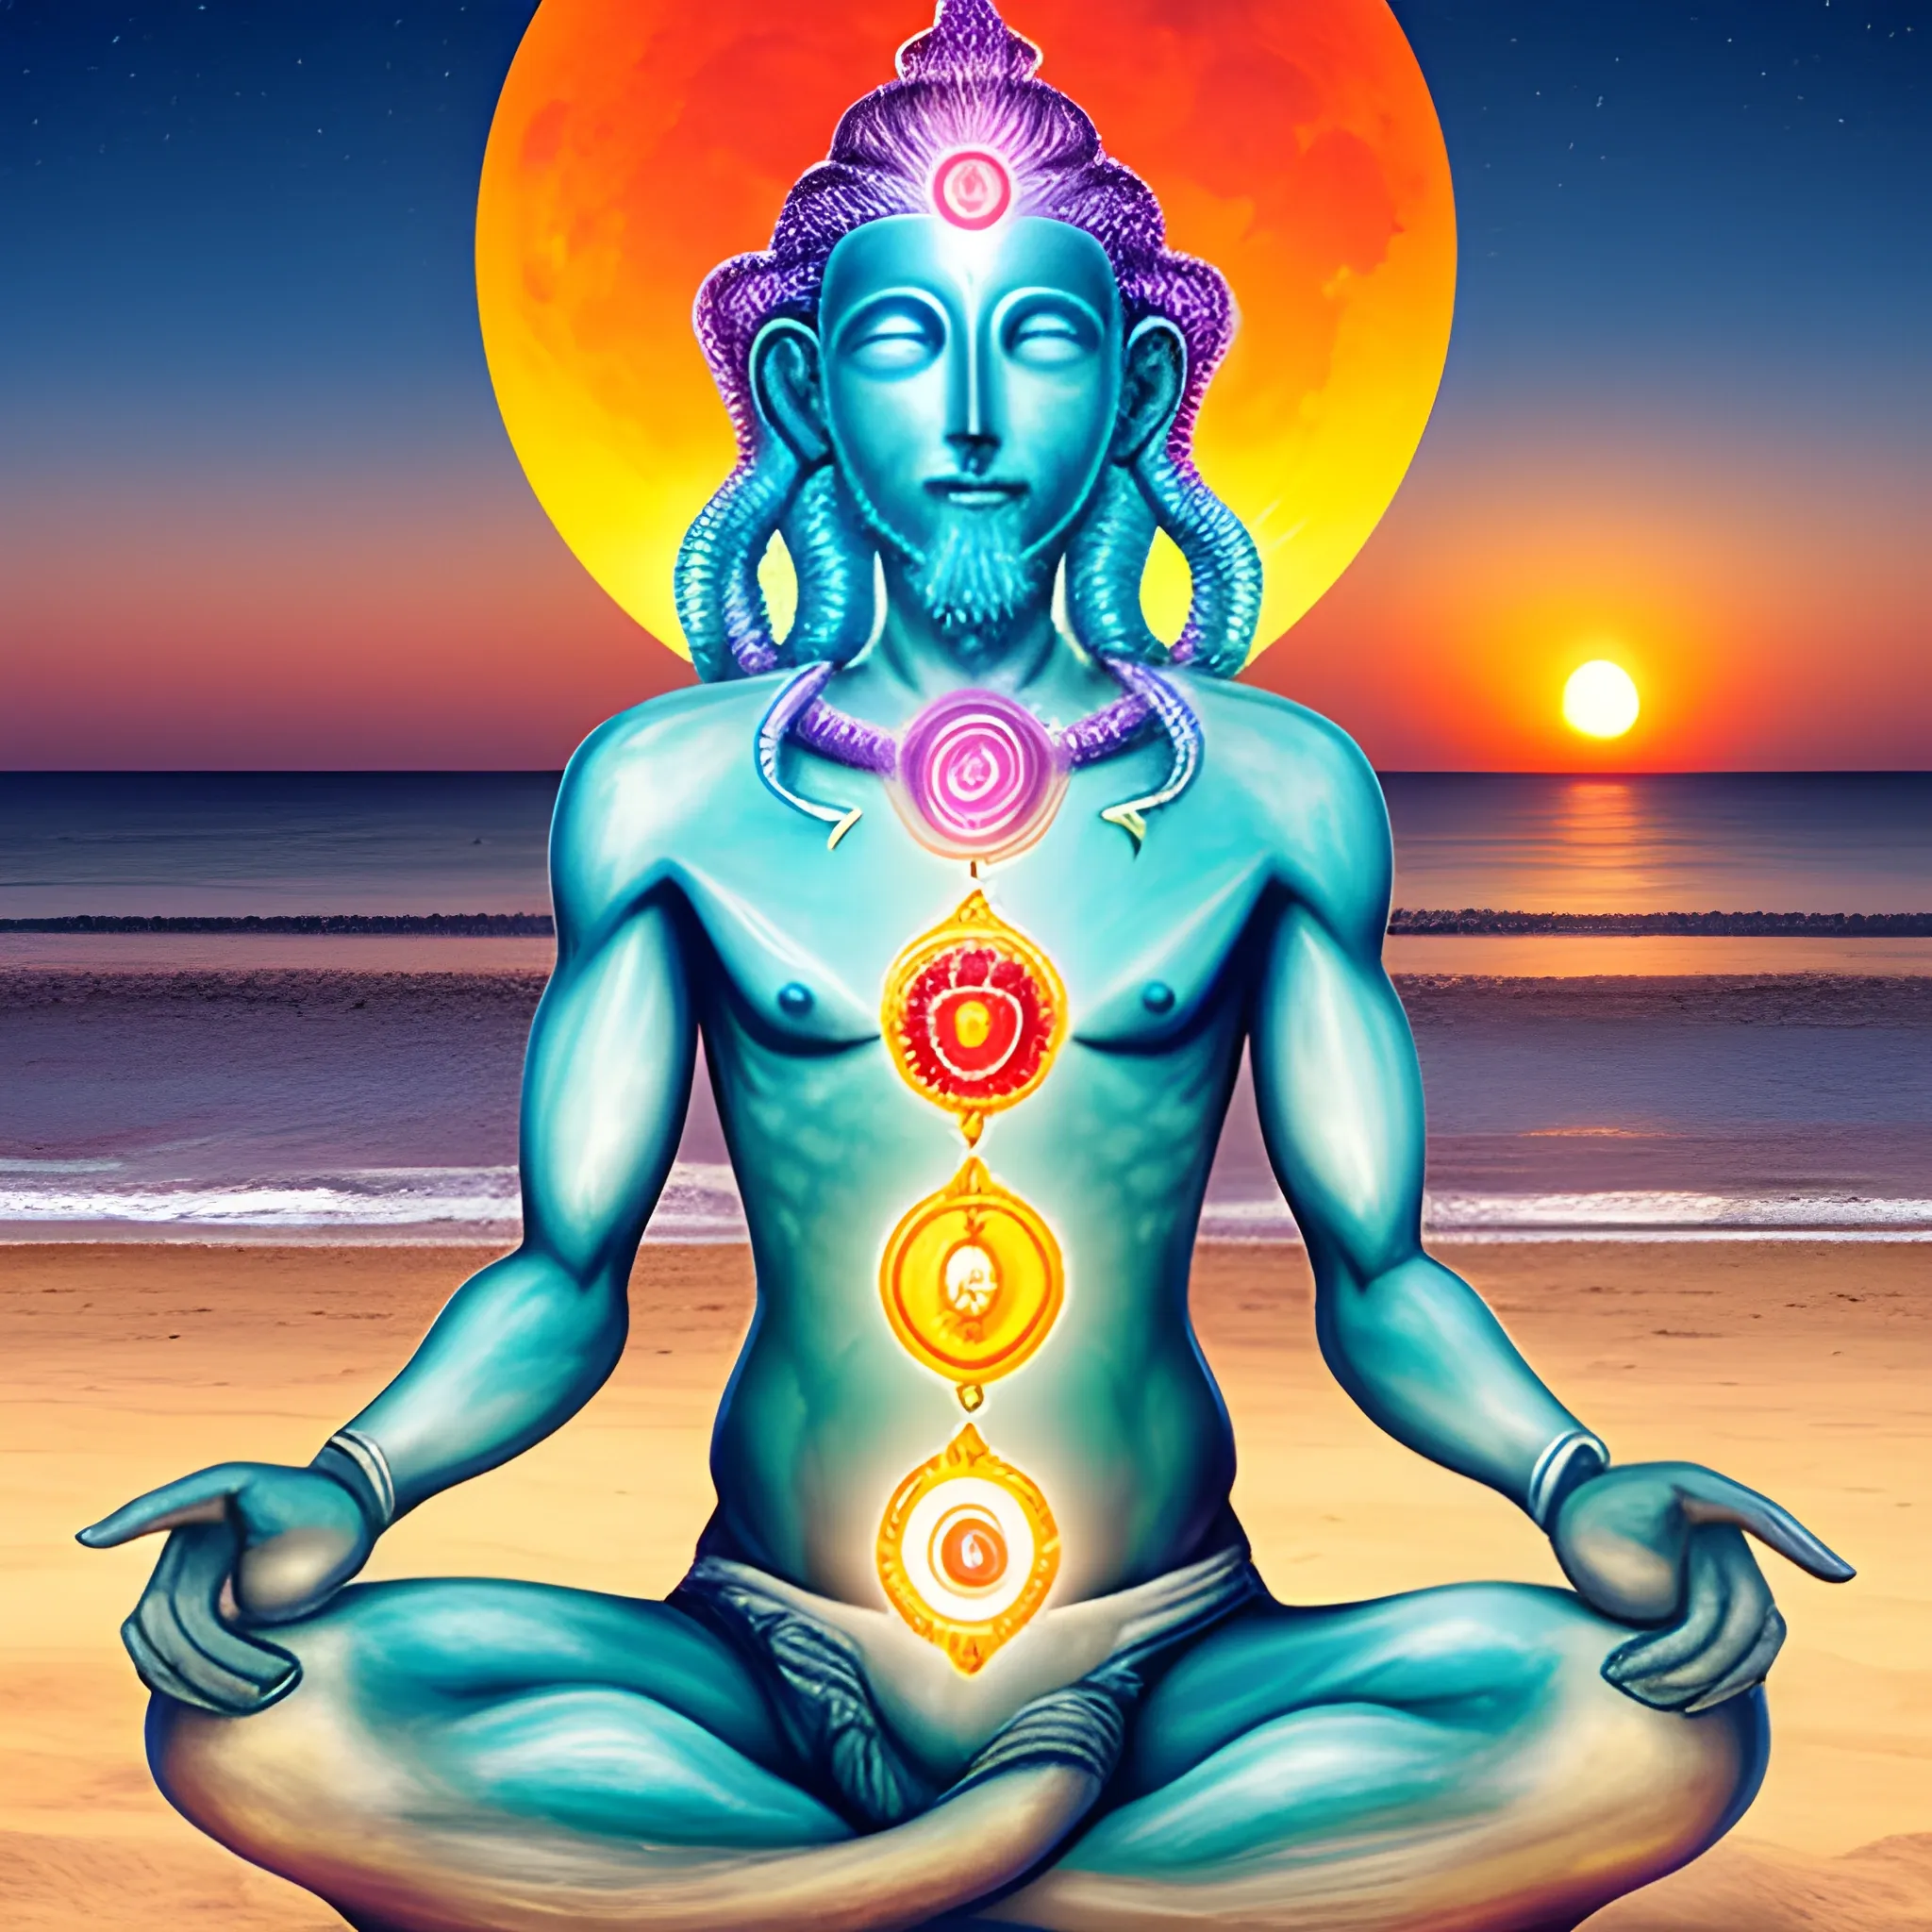 human being with the seven chakras, beach, sunset, universe, moon, caduceus hermes, road, initiation.